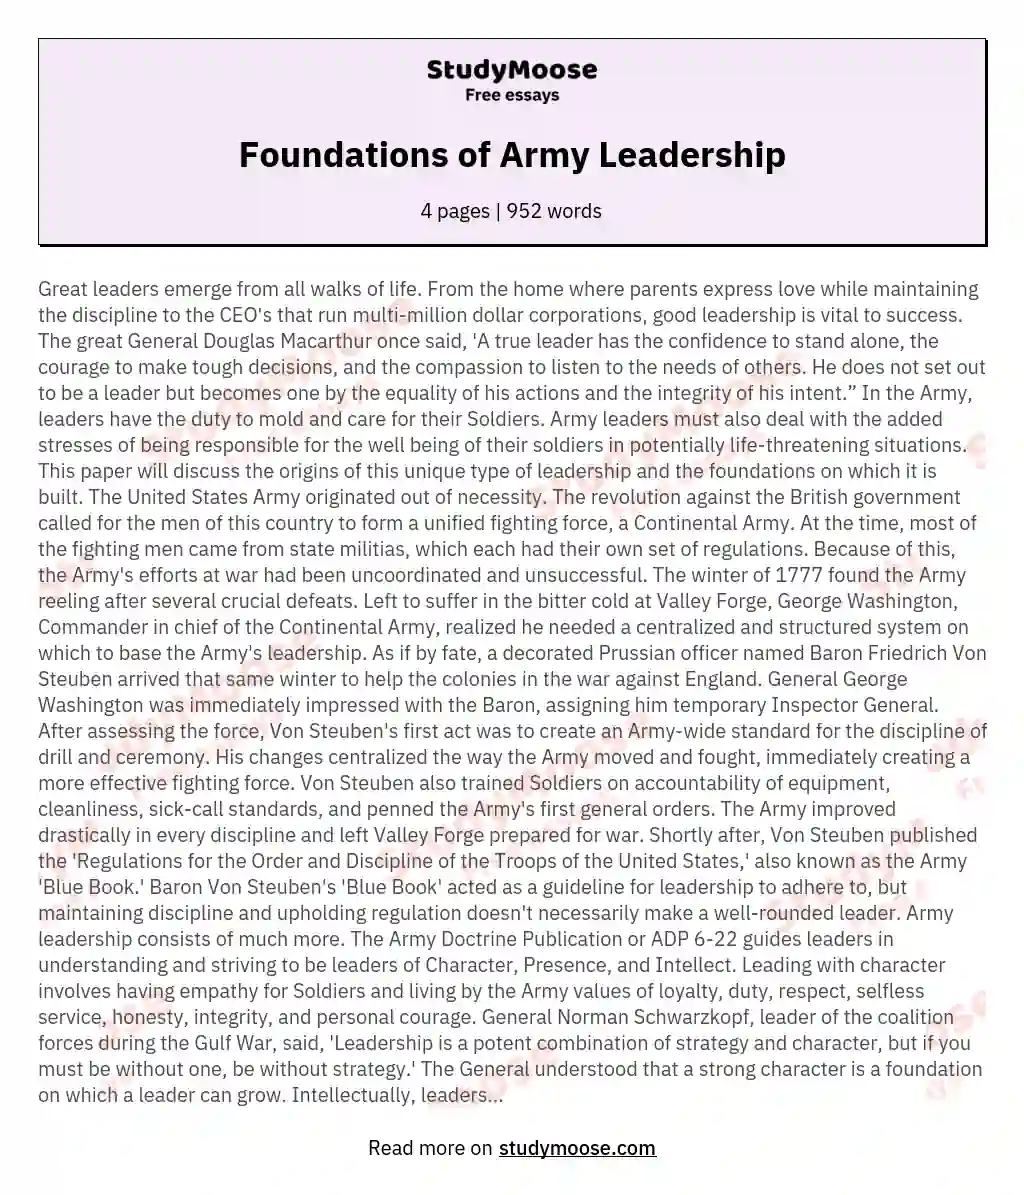 Foundations of Army Leadership